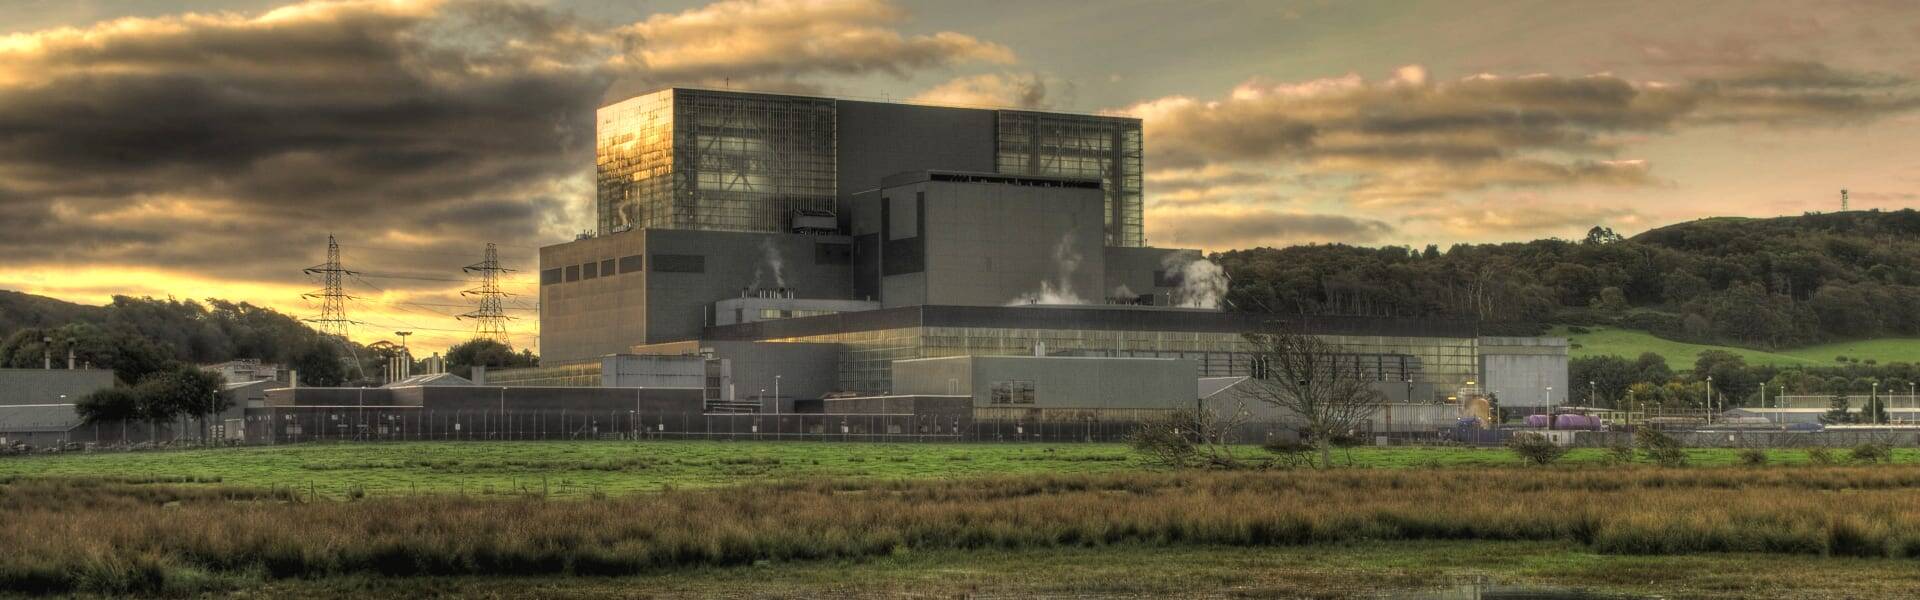 ‘No reason’ not to extend life of UK nuclear fleet